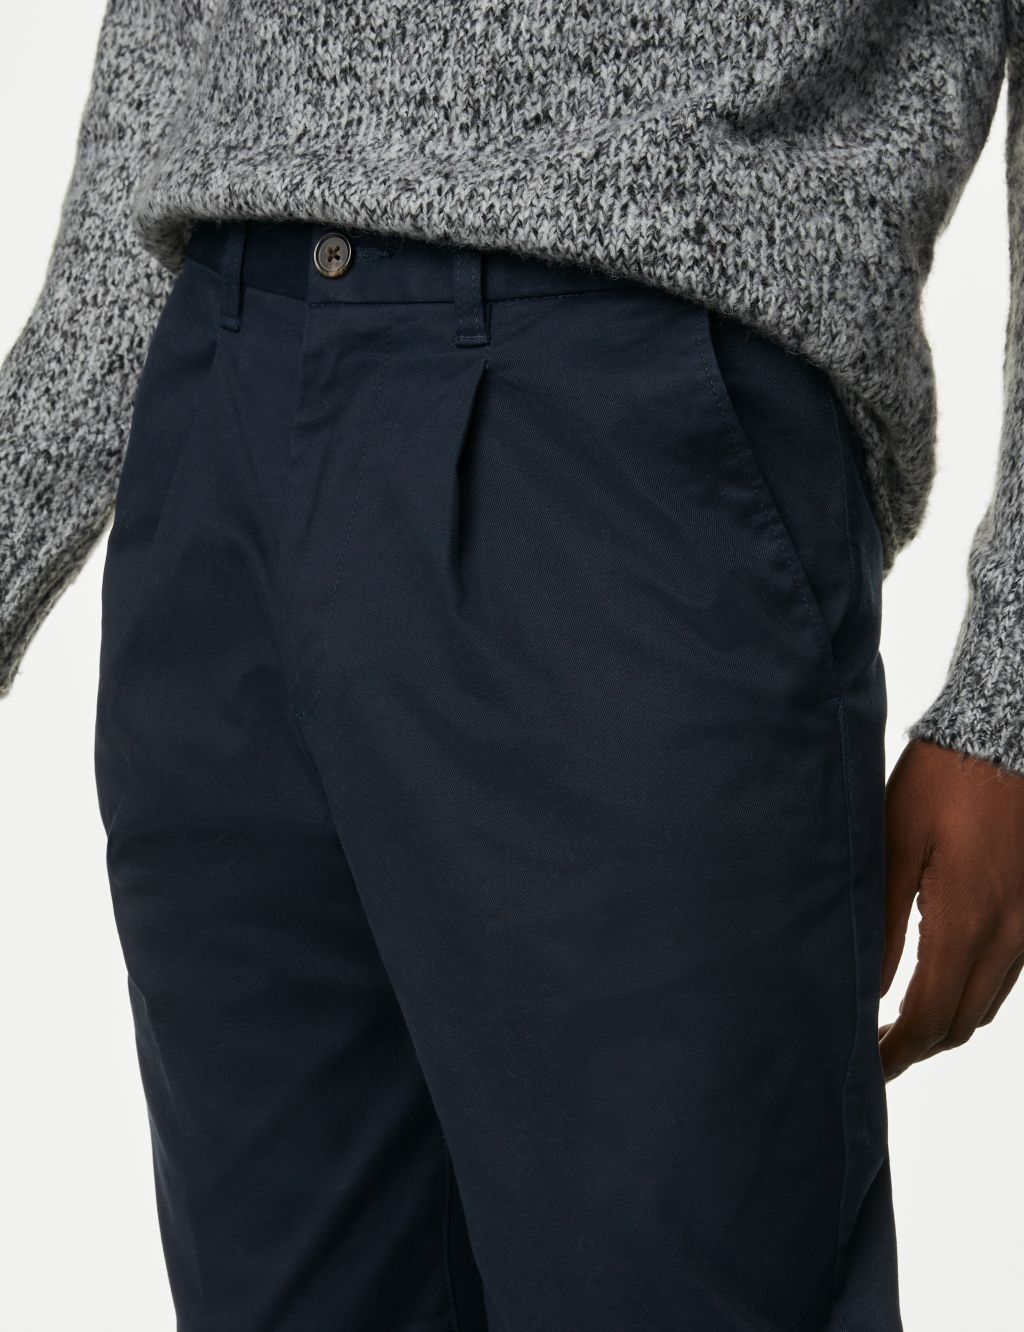 Tapered Fit Single Pleat Chinos image 4